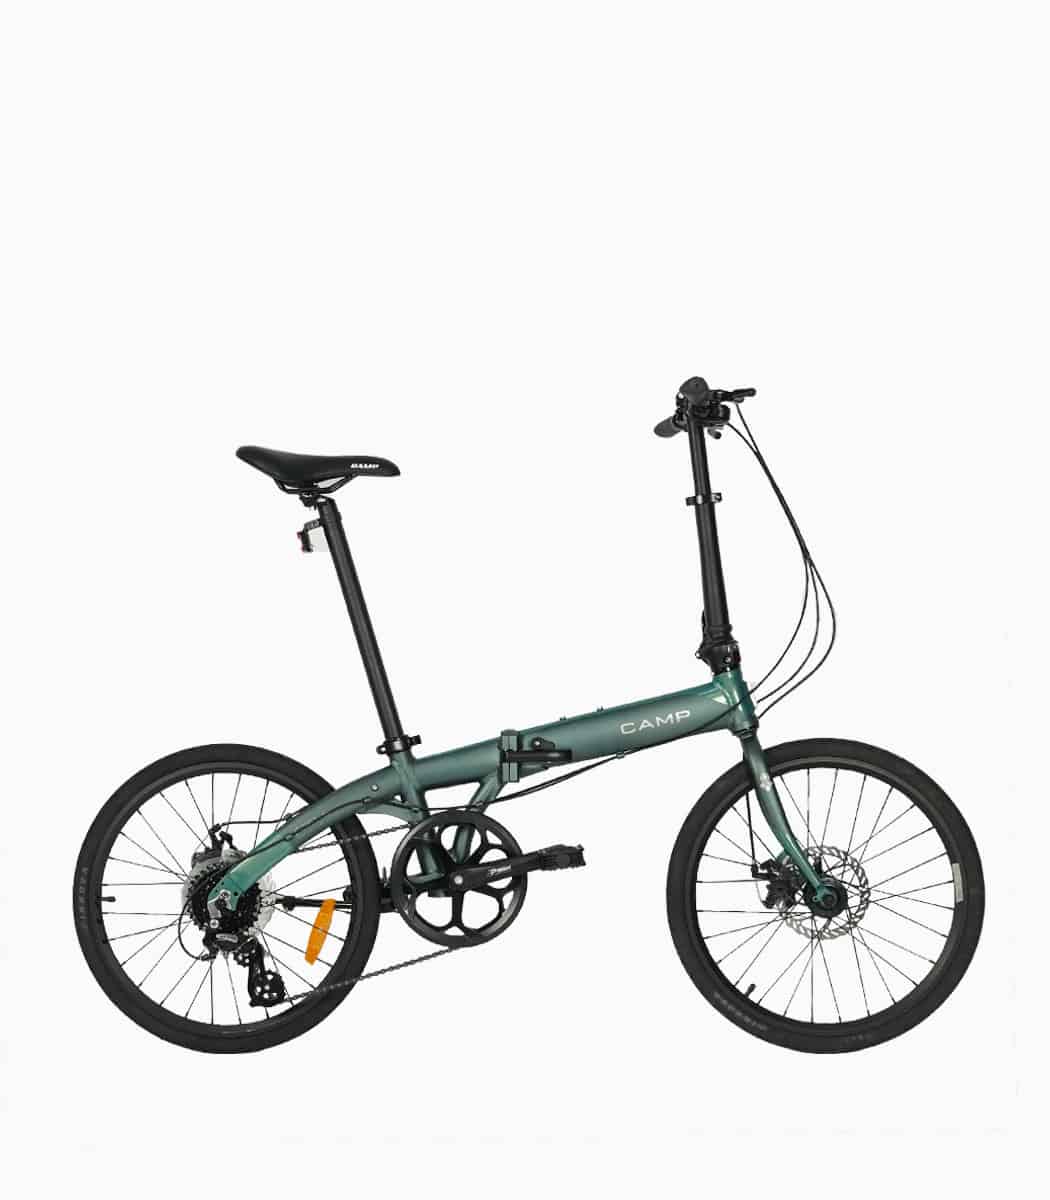 CAMP Polo 8 (GREEN) foldable bicycle right